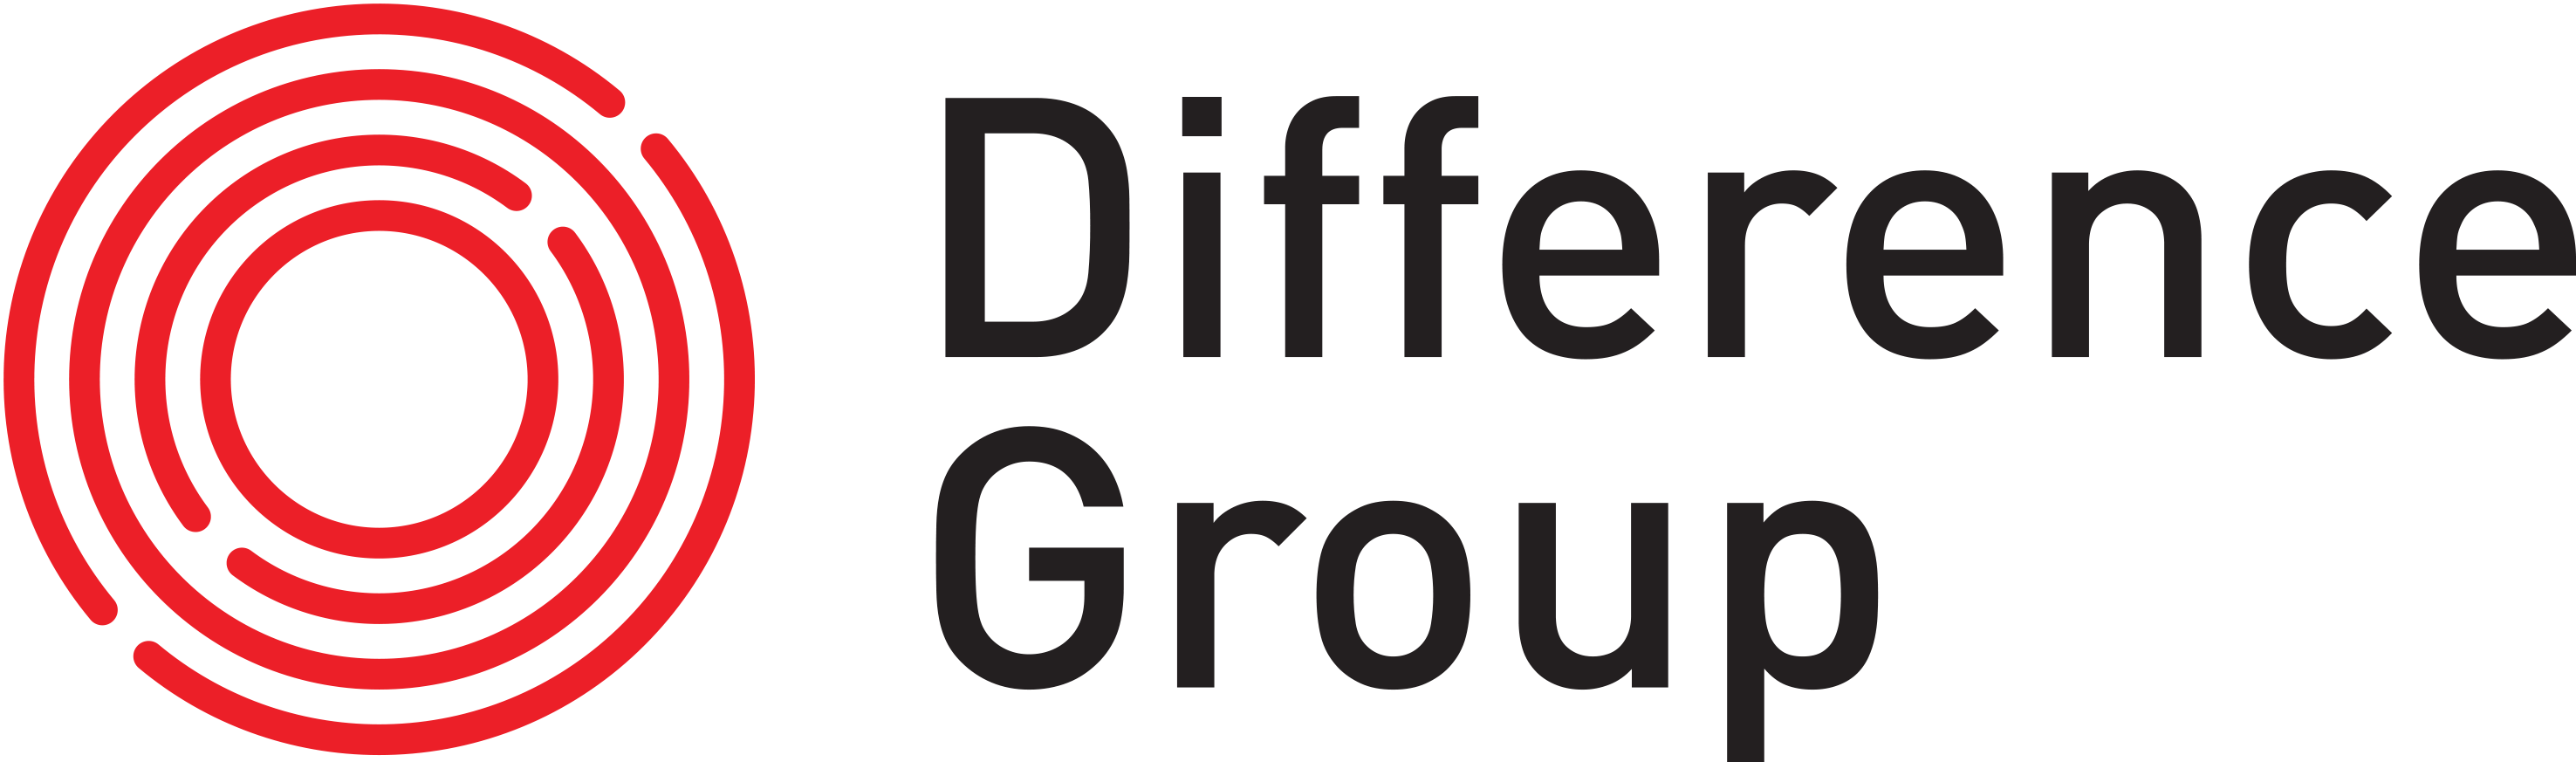 logo for The Difference Hospitality Group Ltd